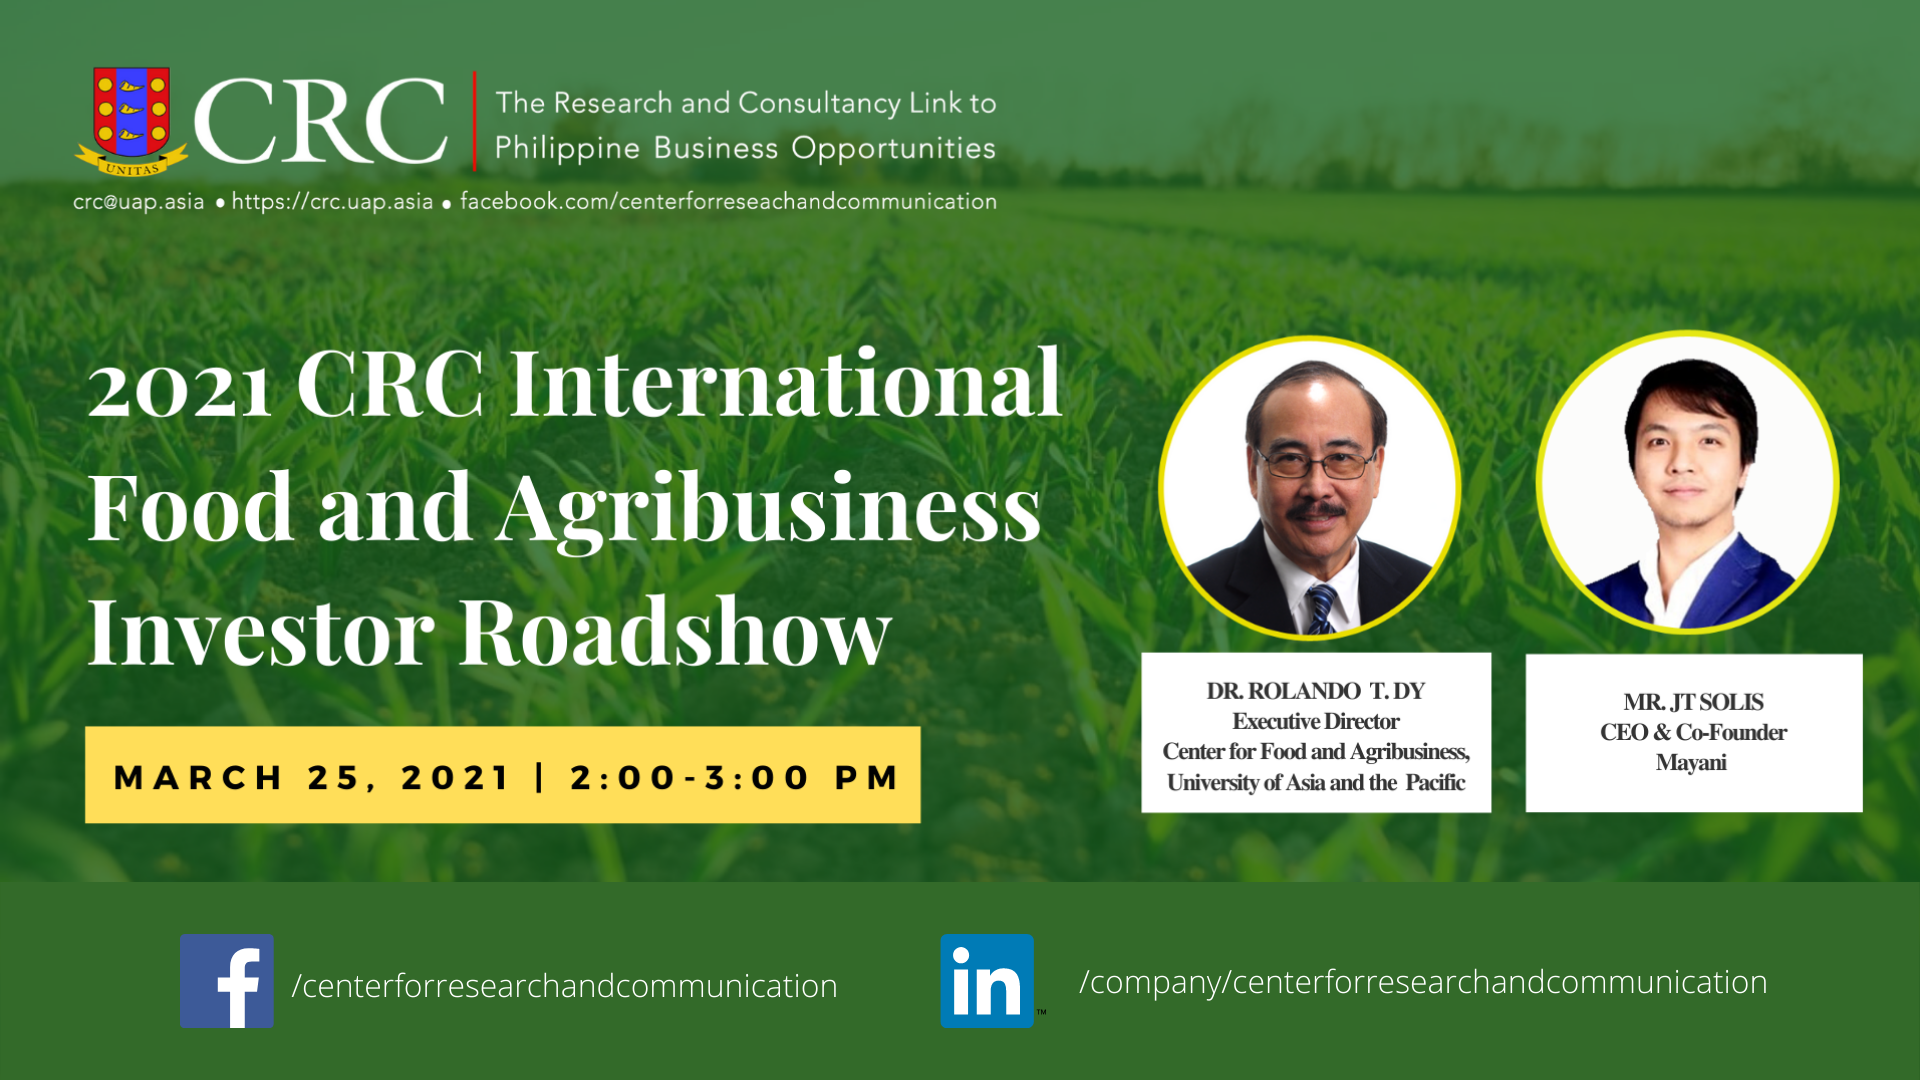 VIDEO — CRC holds its 2021 International Food and Agribusiness Investor Roadshow